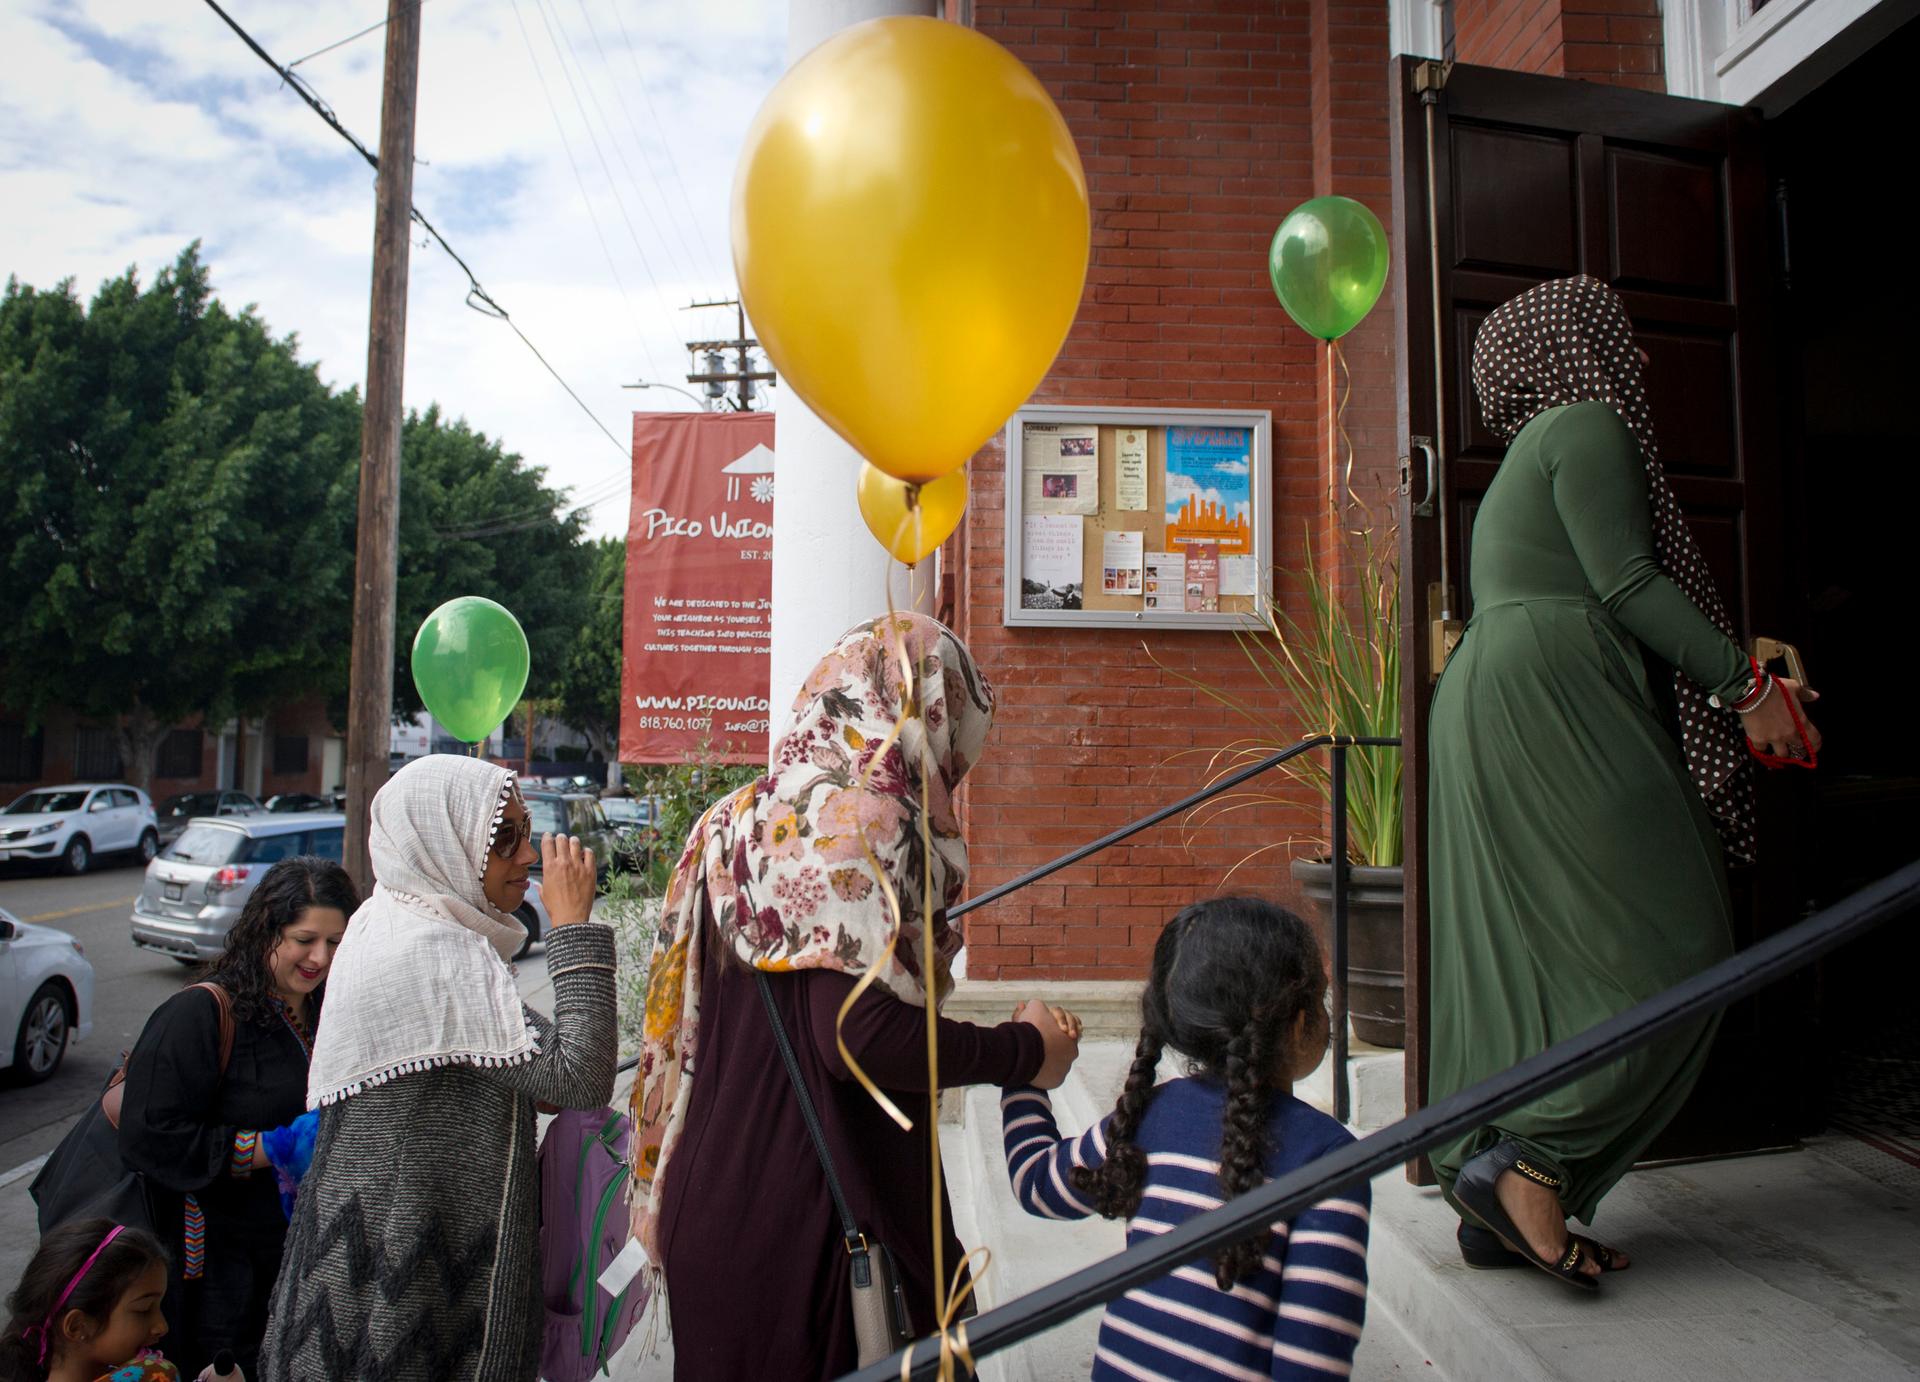 mosqueMuslim women arrive for the prayer service at the Women's Mosque of America in downtown Los Angeles in January. The mosque, the first of its kind in the US, launched with a women-led prayer service.